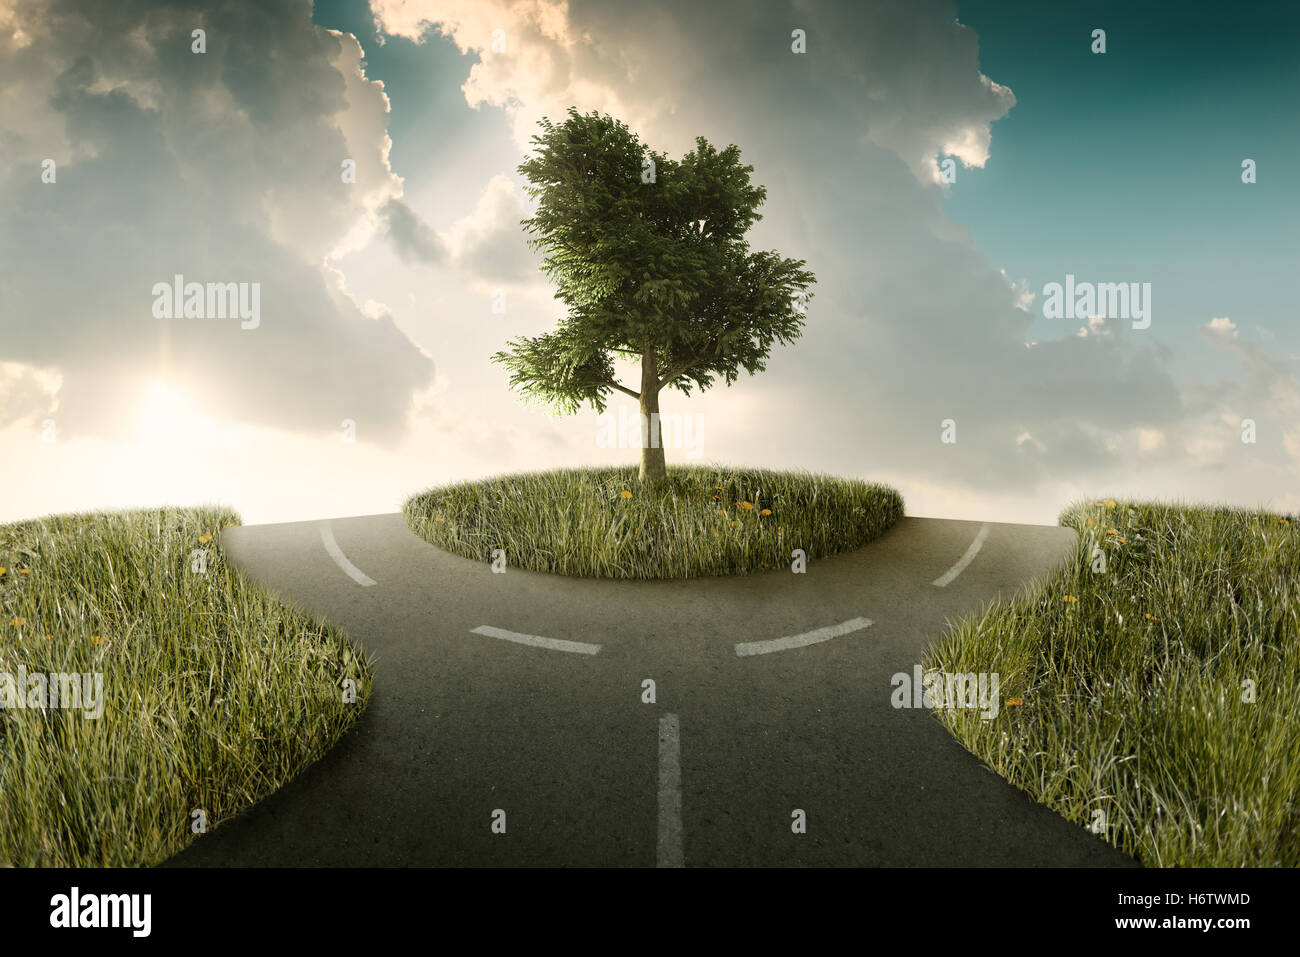 travel tree hill choose crossroad option road street travel tree hill sunset cloud direction choose rotary decision landscape Stock Photo